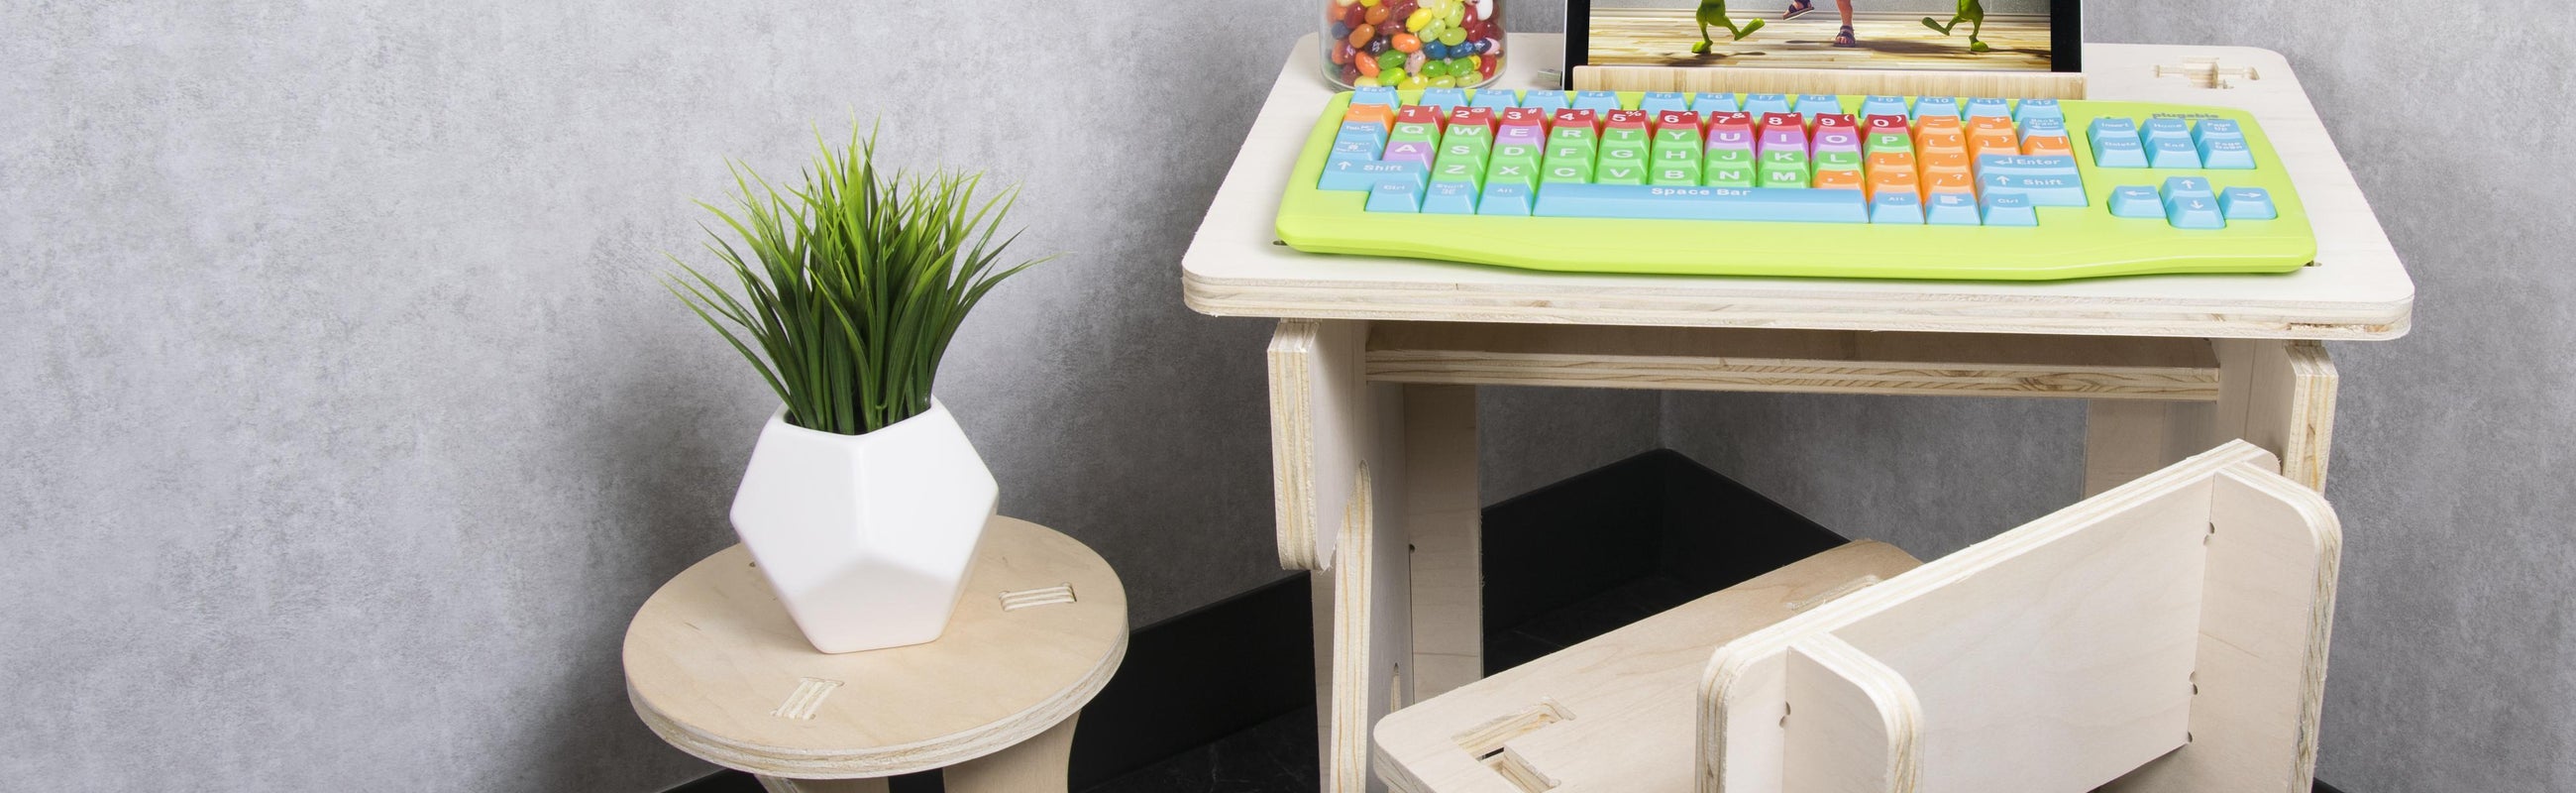 An image of the USB-EZK-G Kids Keyboard with some kid-sized furniture, tablet, and other décor.